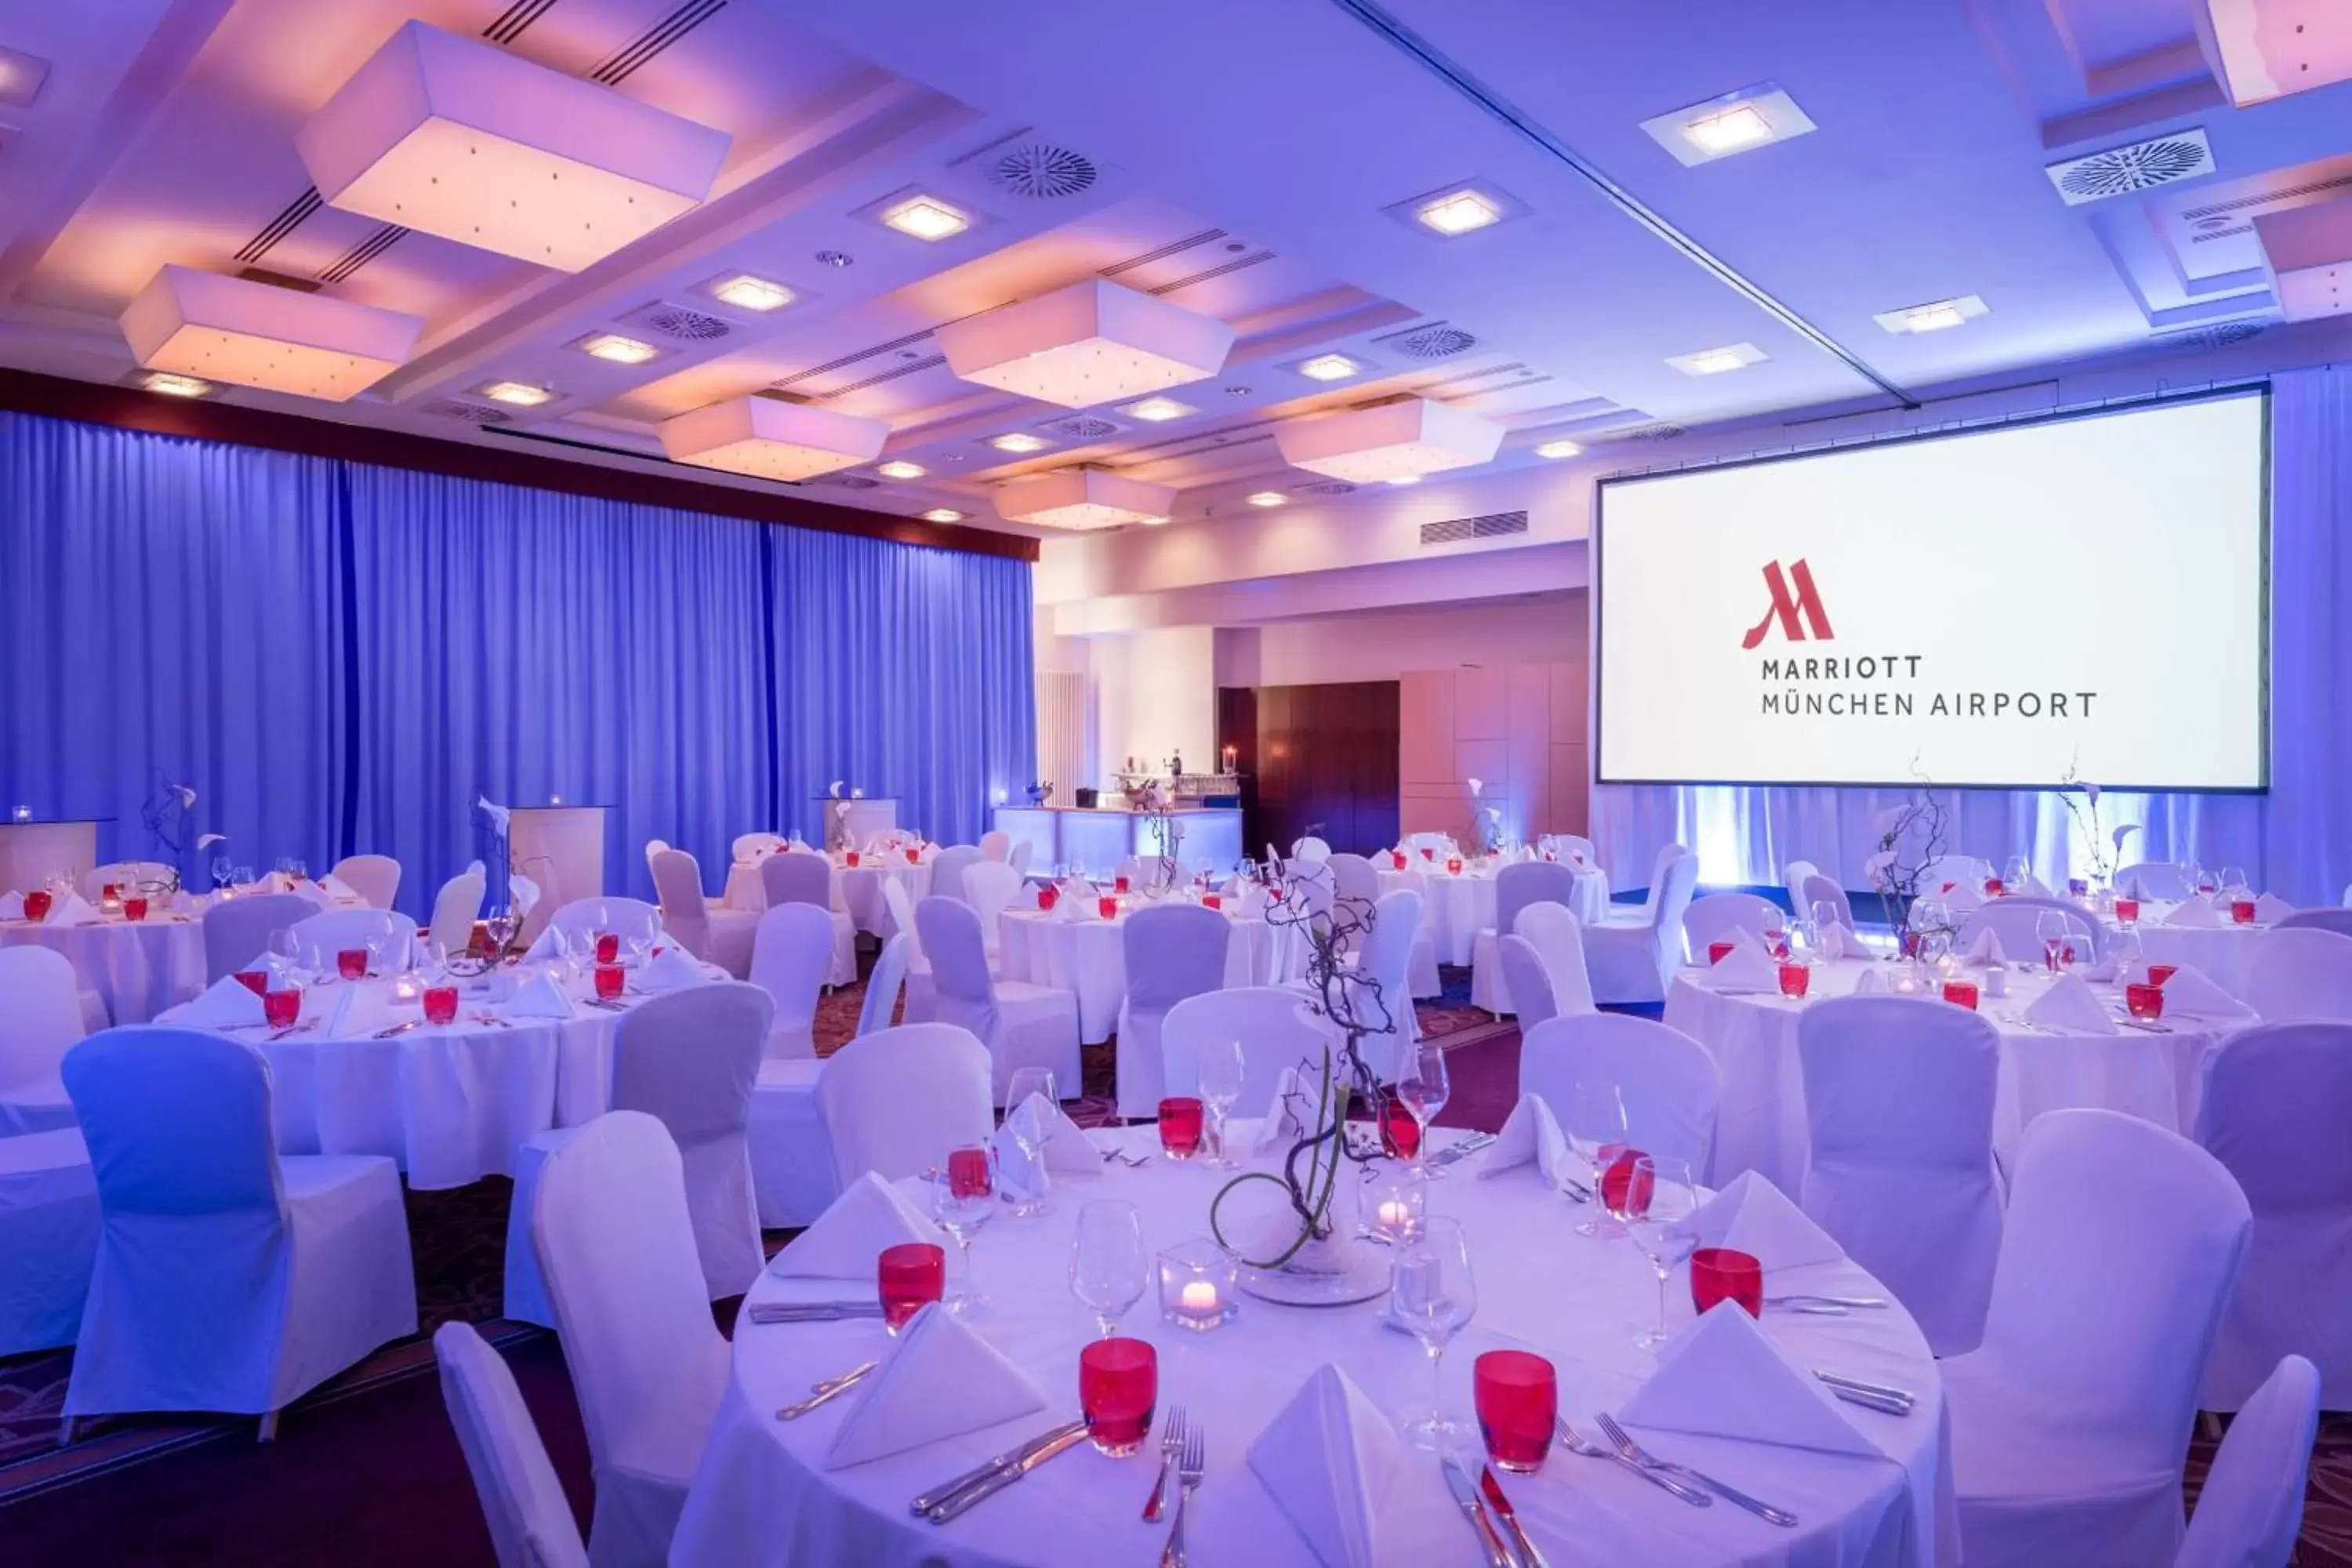 Meeting/conference room, Banquet Facilities in Munich Airport Marriott Hotel